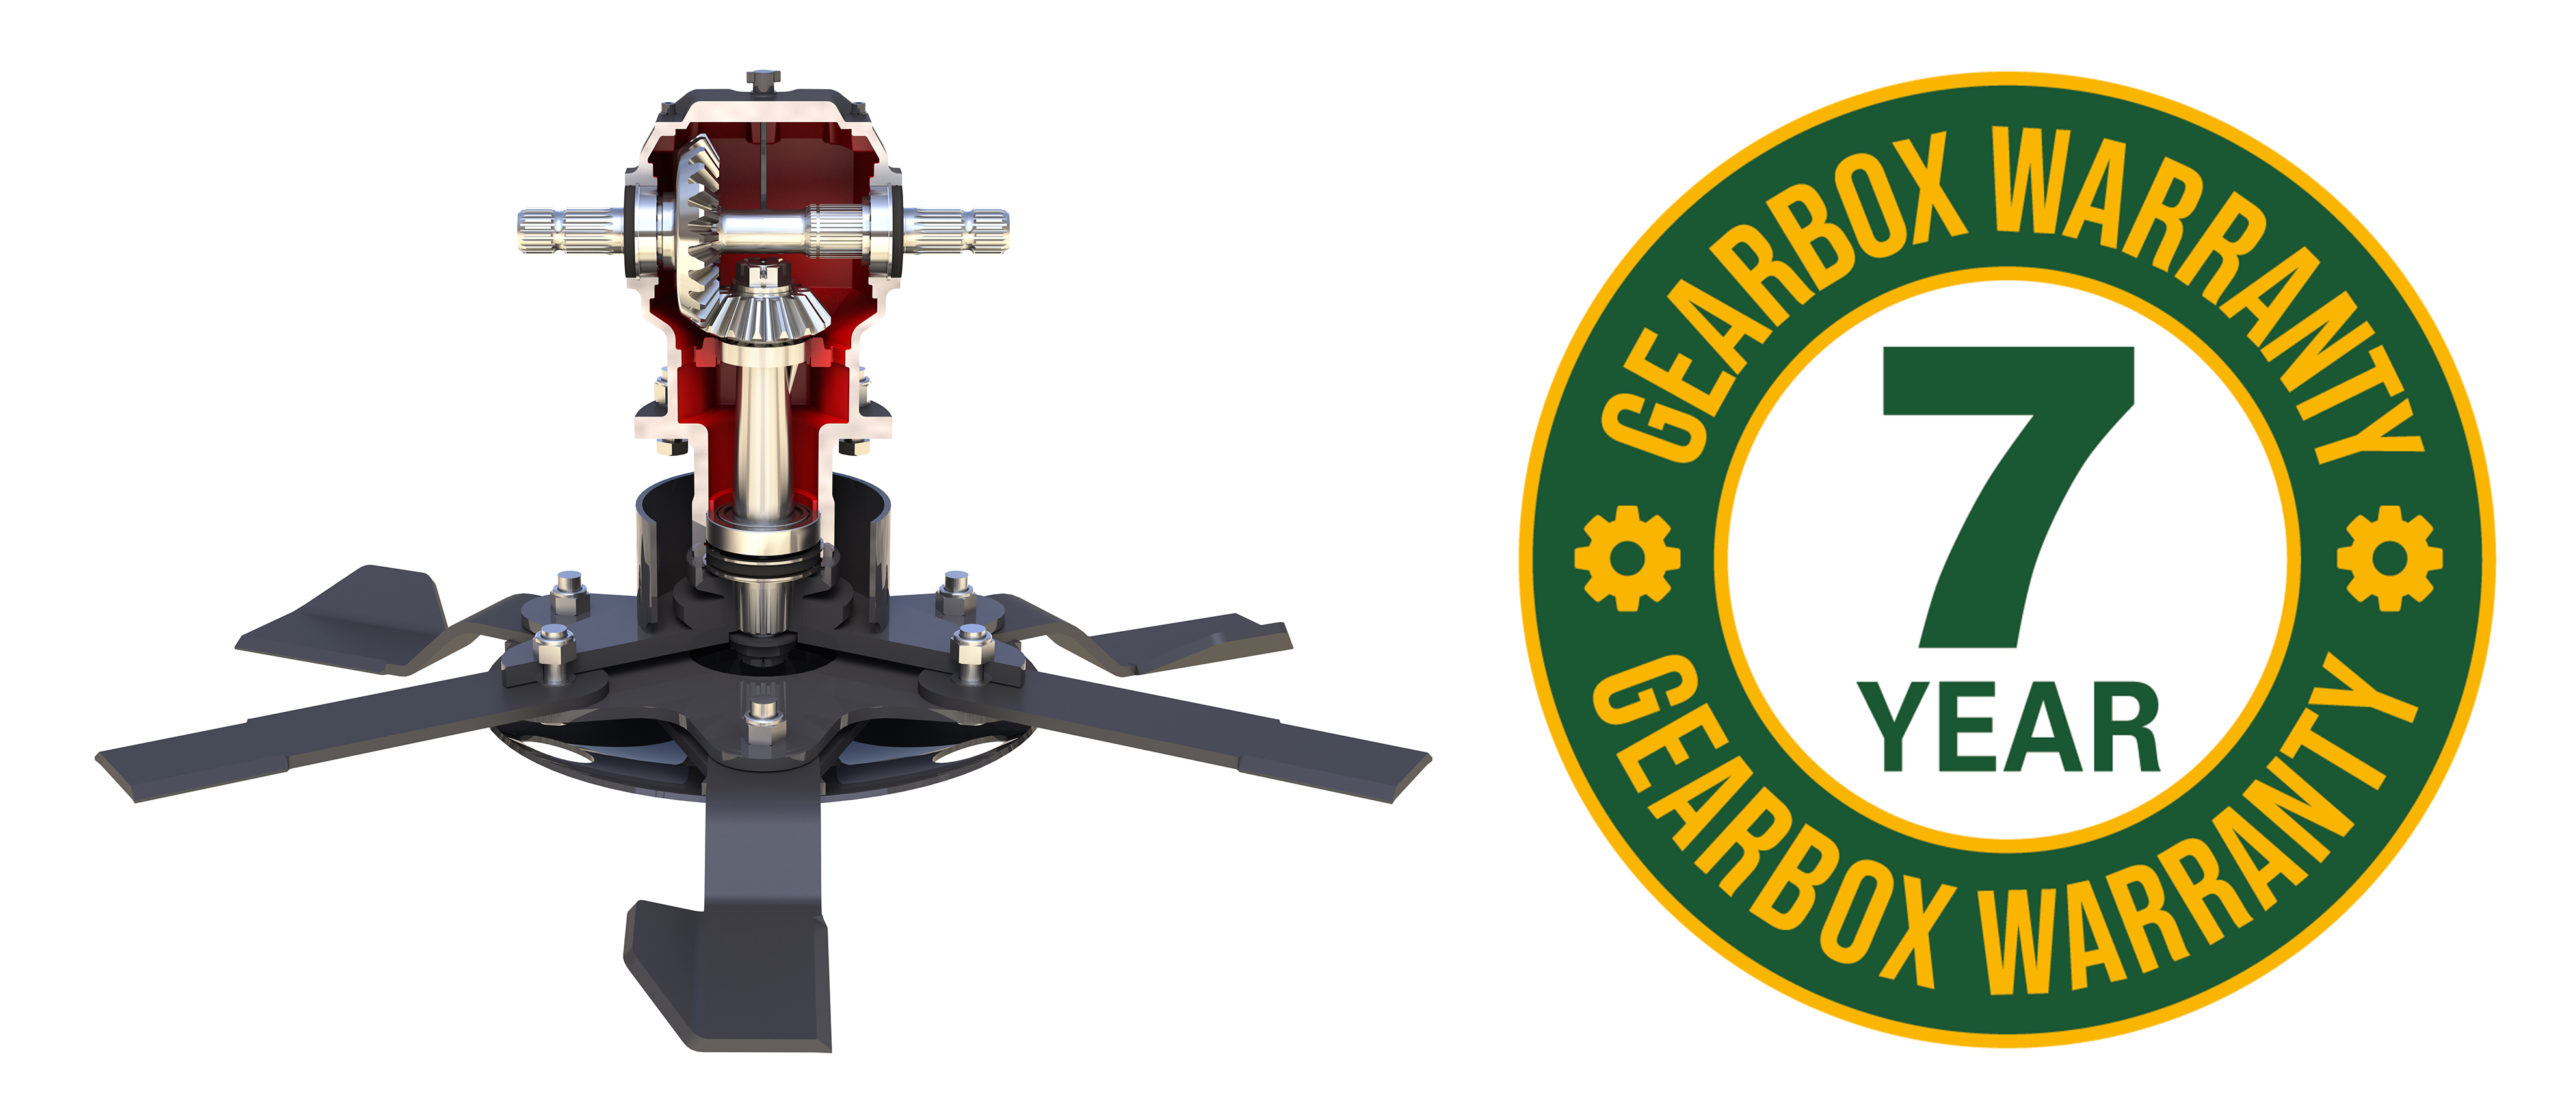 Spearhead grows gearbox warranty to 7 years